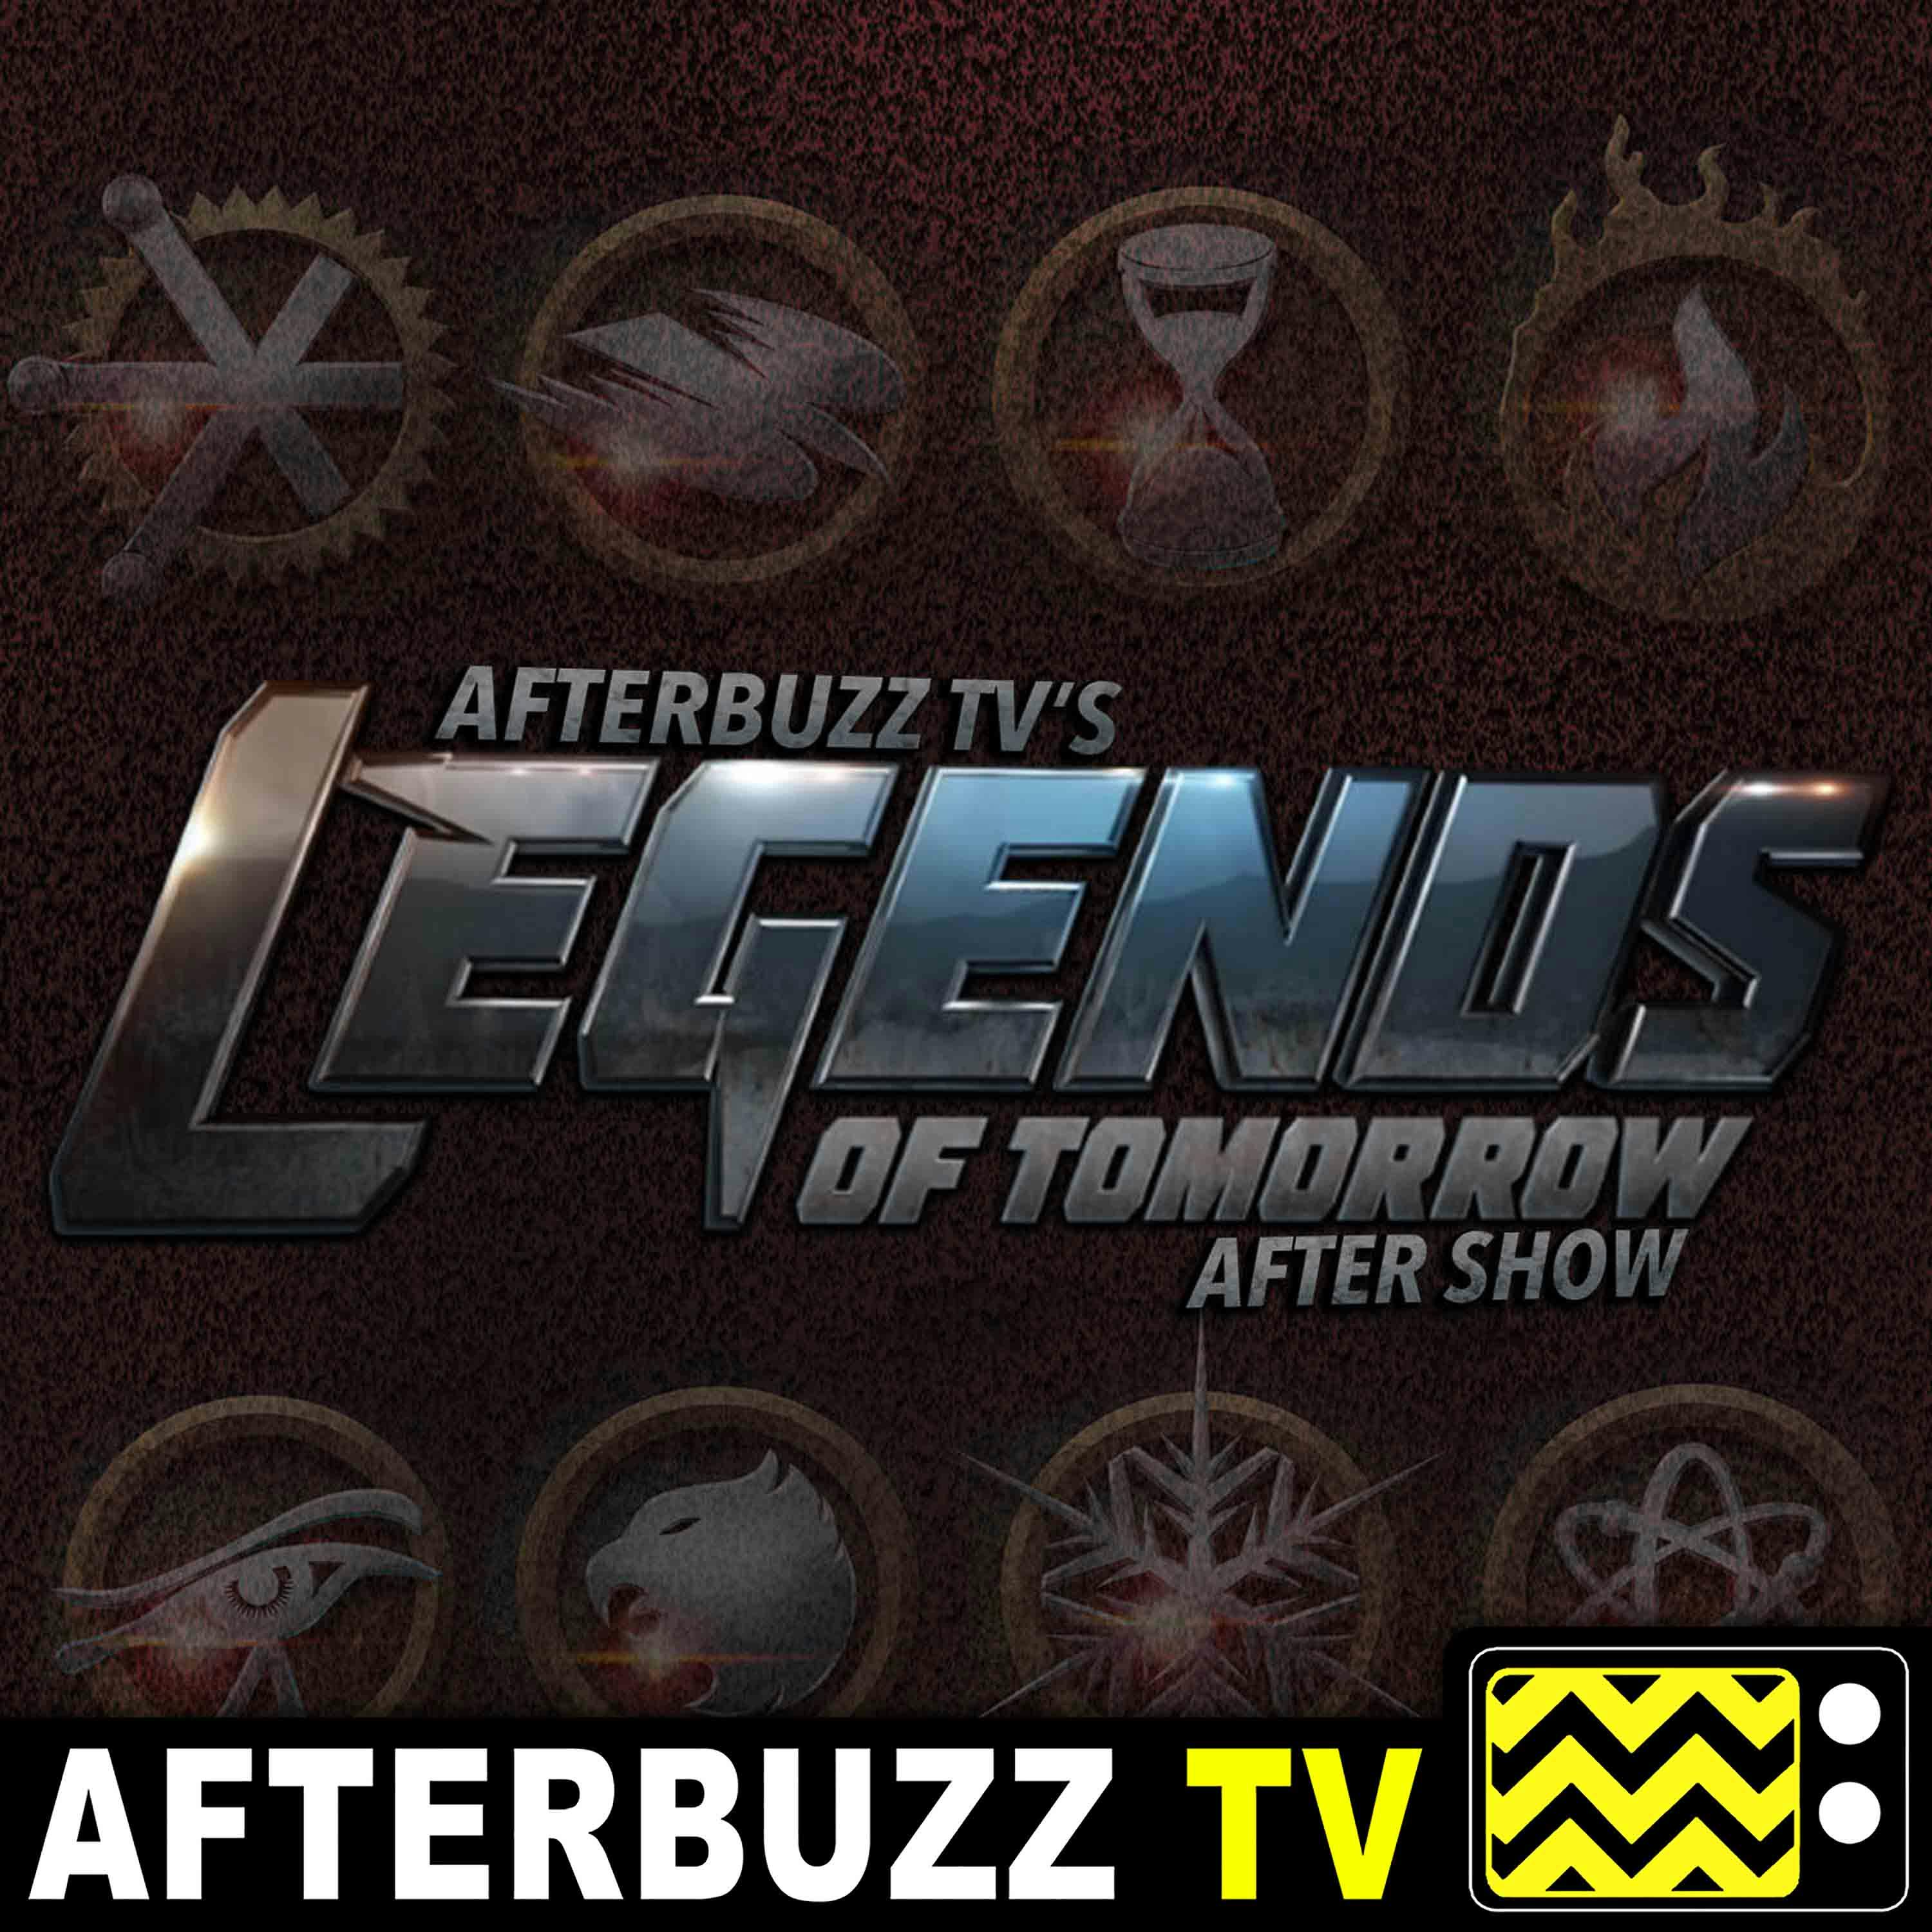 Legends Of Tomorrow S:3 | Crisis on Earth-X, Part 4 E:8 | AfterBuzz TV AfterShow